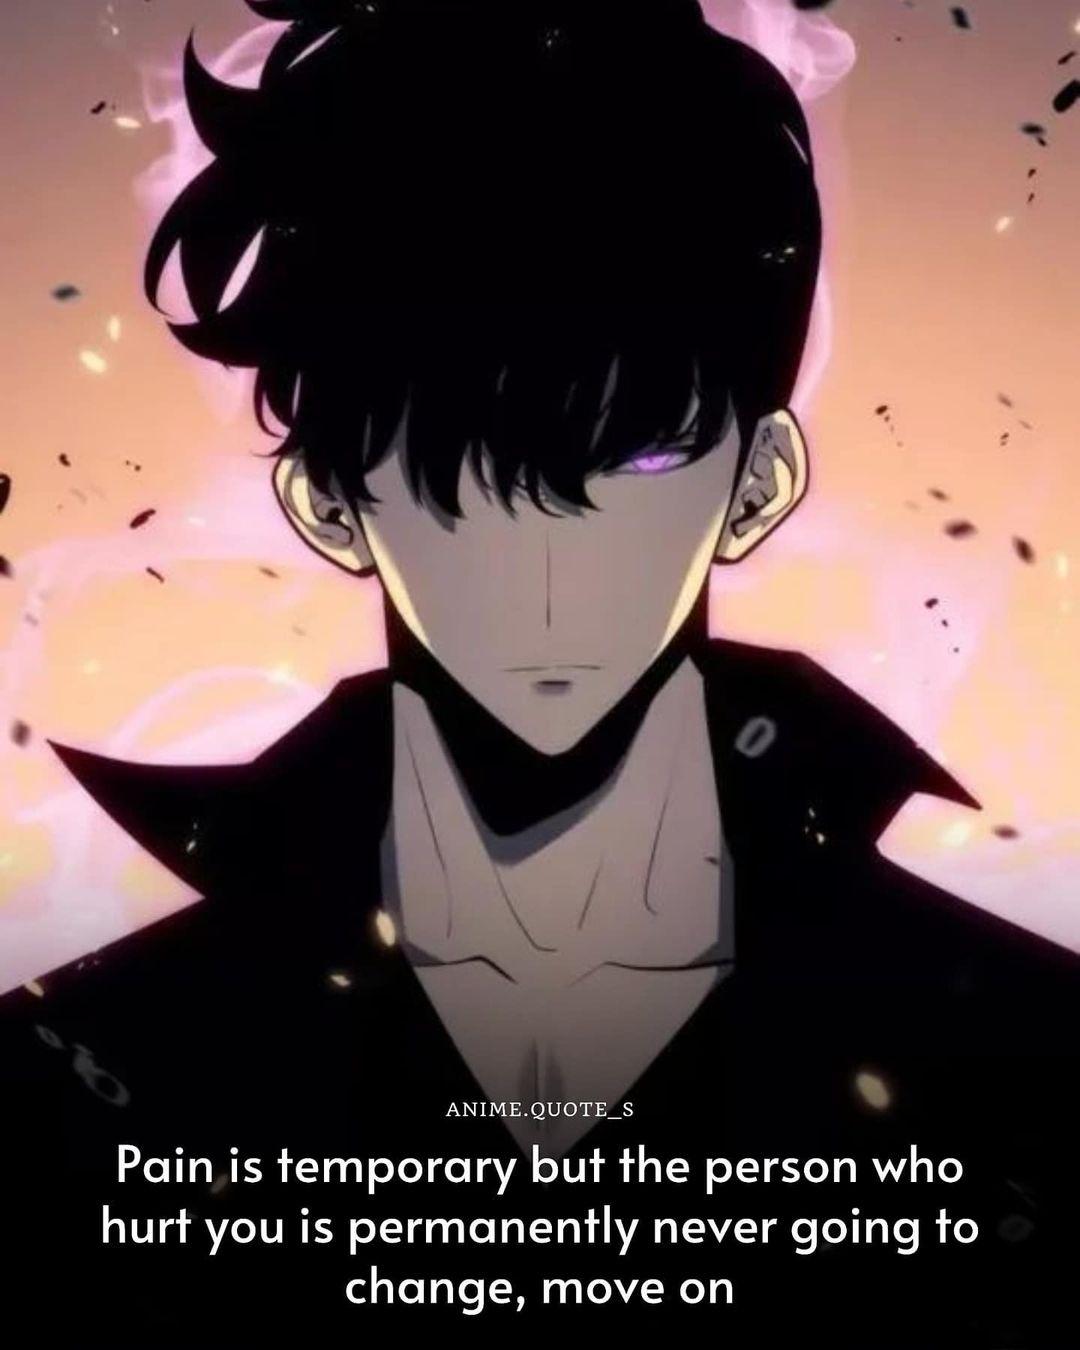 Best 100+ Epic Anime Quotes,
Sad Anime Quotes,
Anime Quotes With Images,
Unique And Life Changing Anime Quotes,
Anime quotes For Instagram,
Anime Quotes About God,
Anime Quotes Funny,

